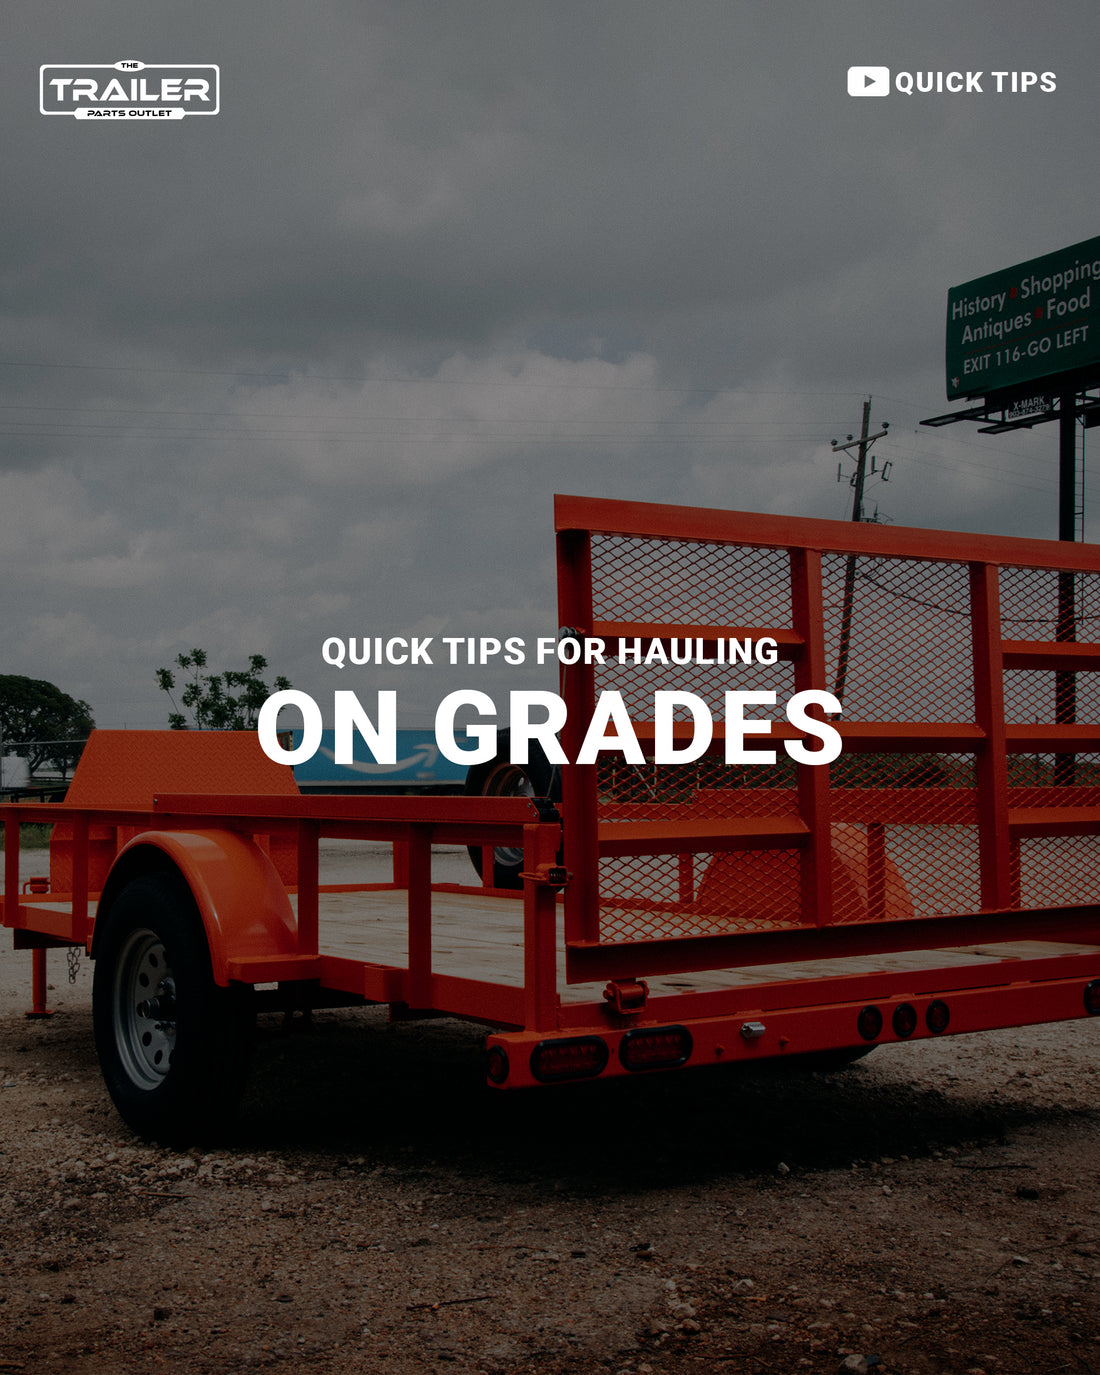 QUICK TIPS: TIPS FOR HAULING ON GRADES